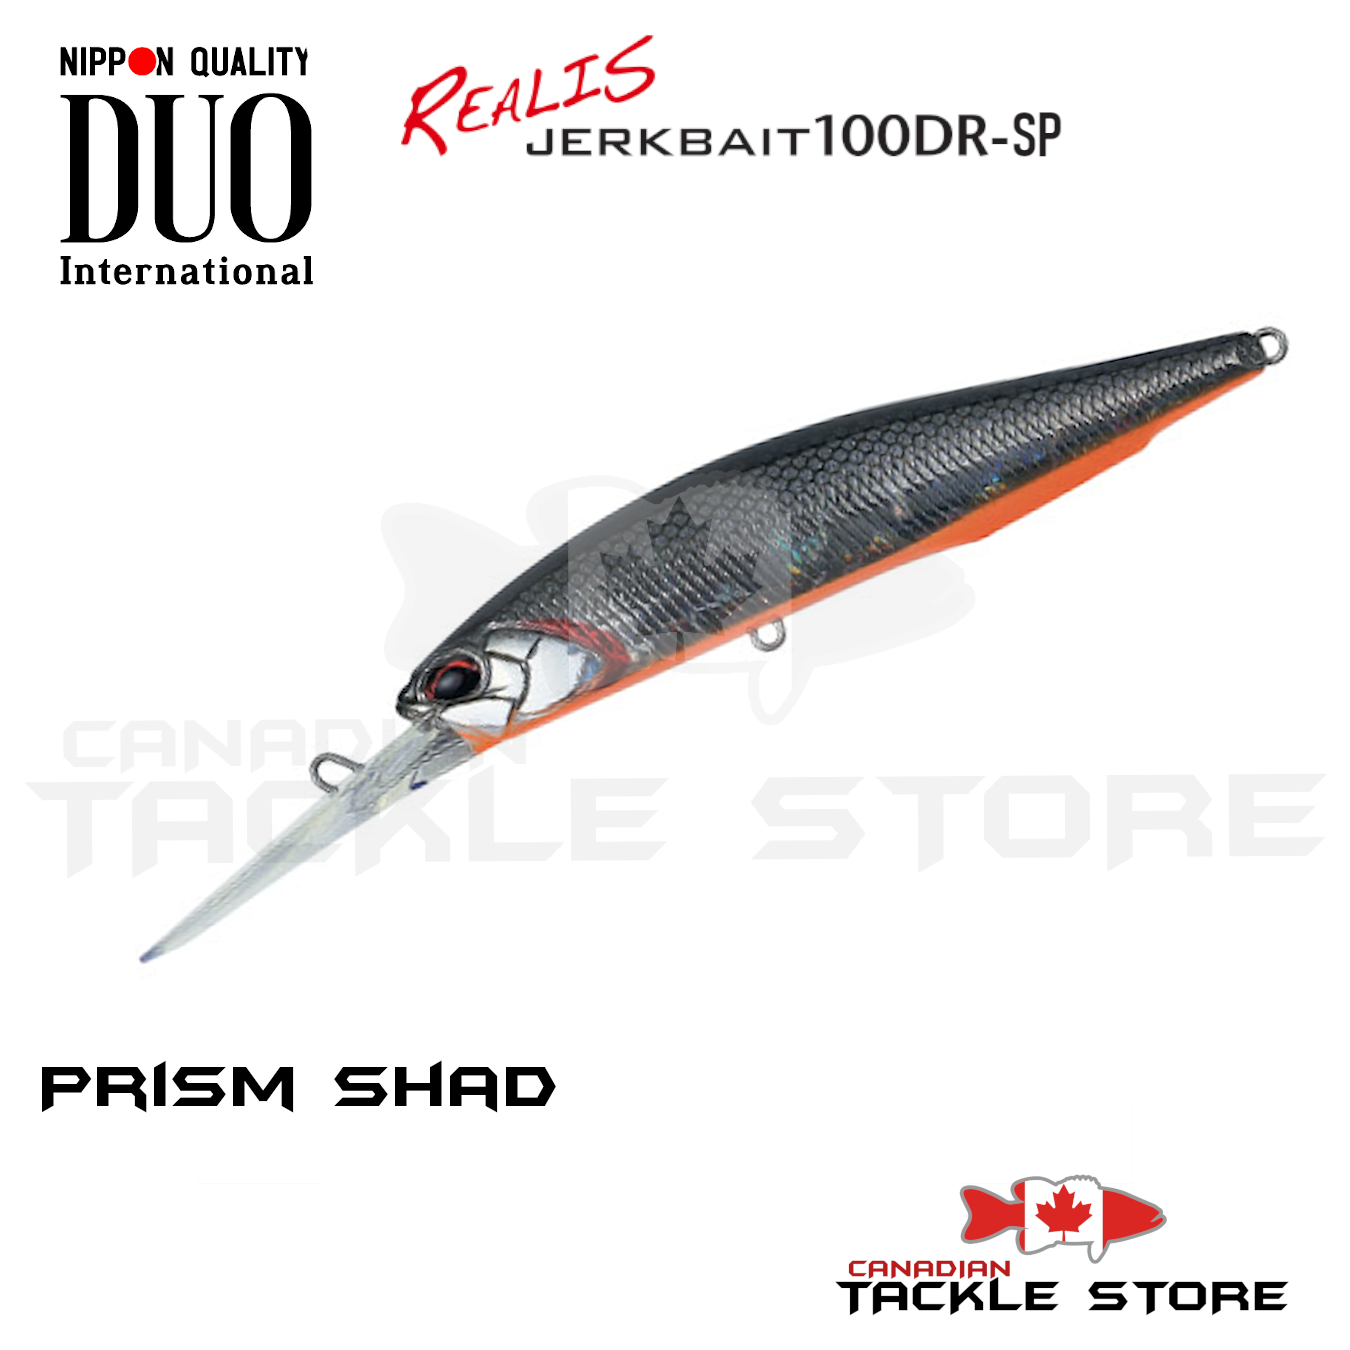 Duo Realis Jerkbait 100DR-SP – Canadian Tackle Store